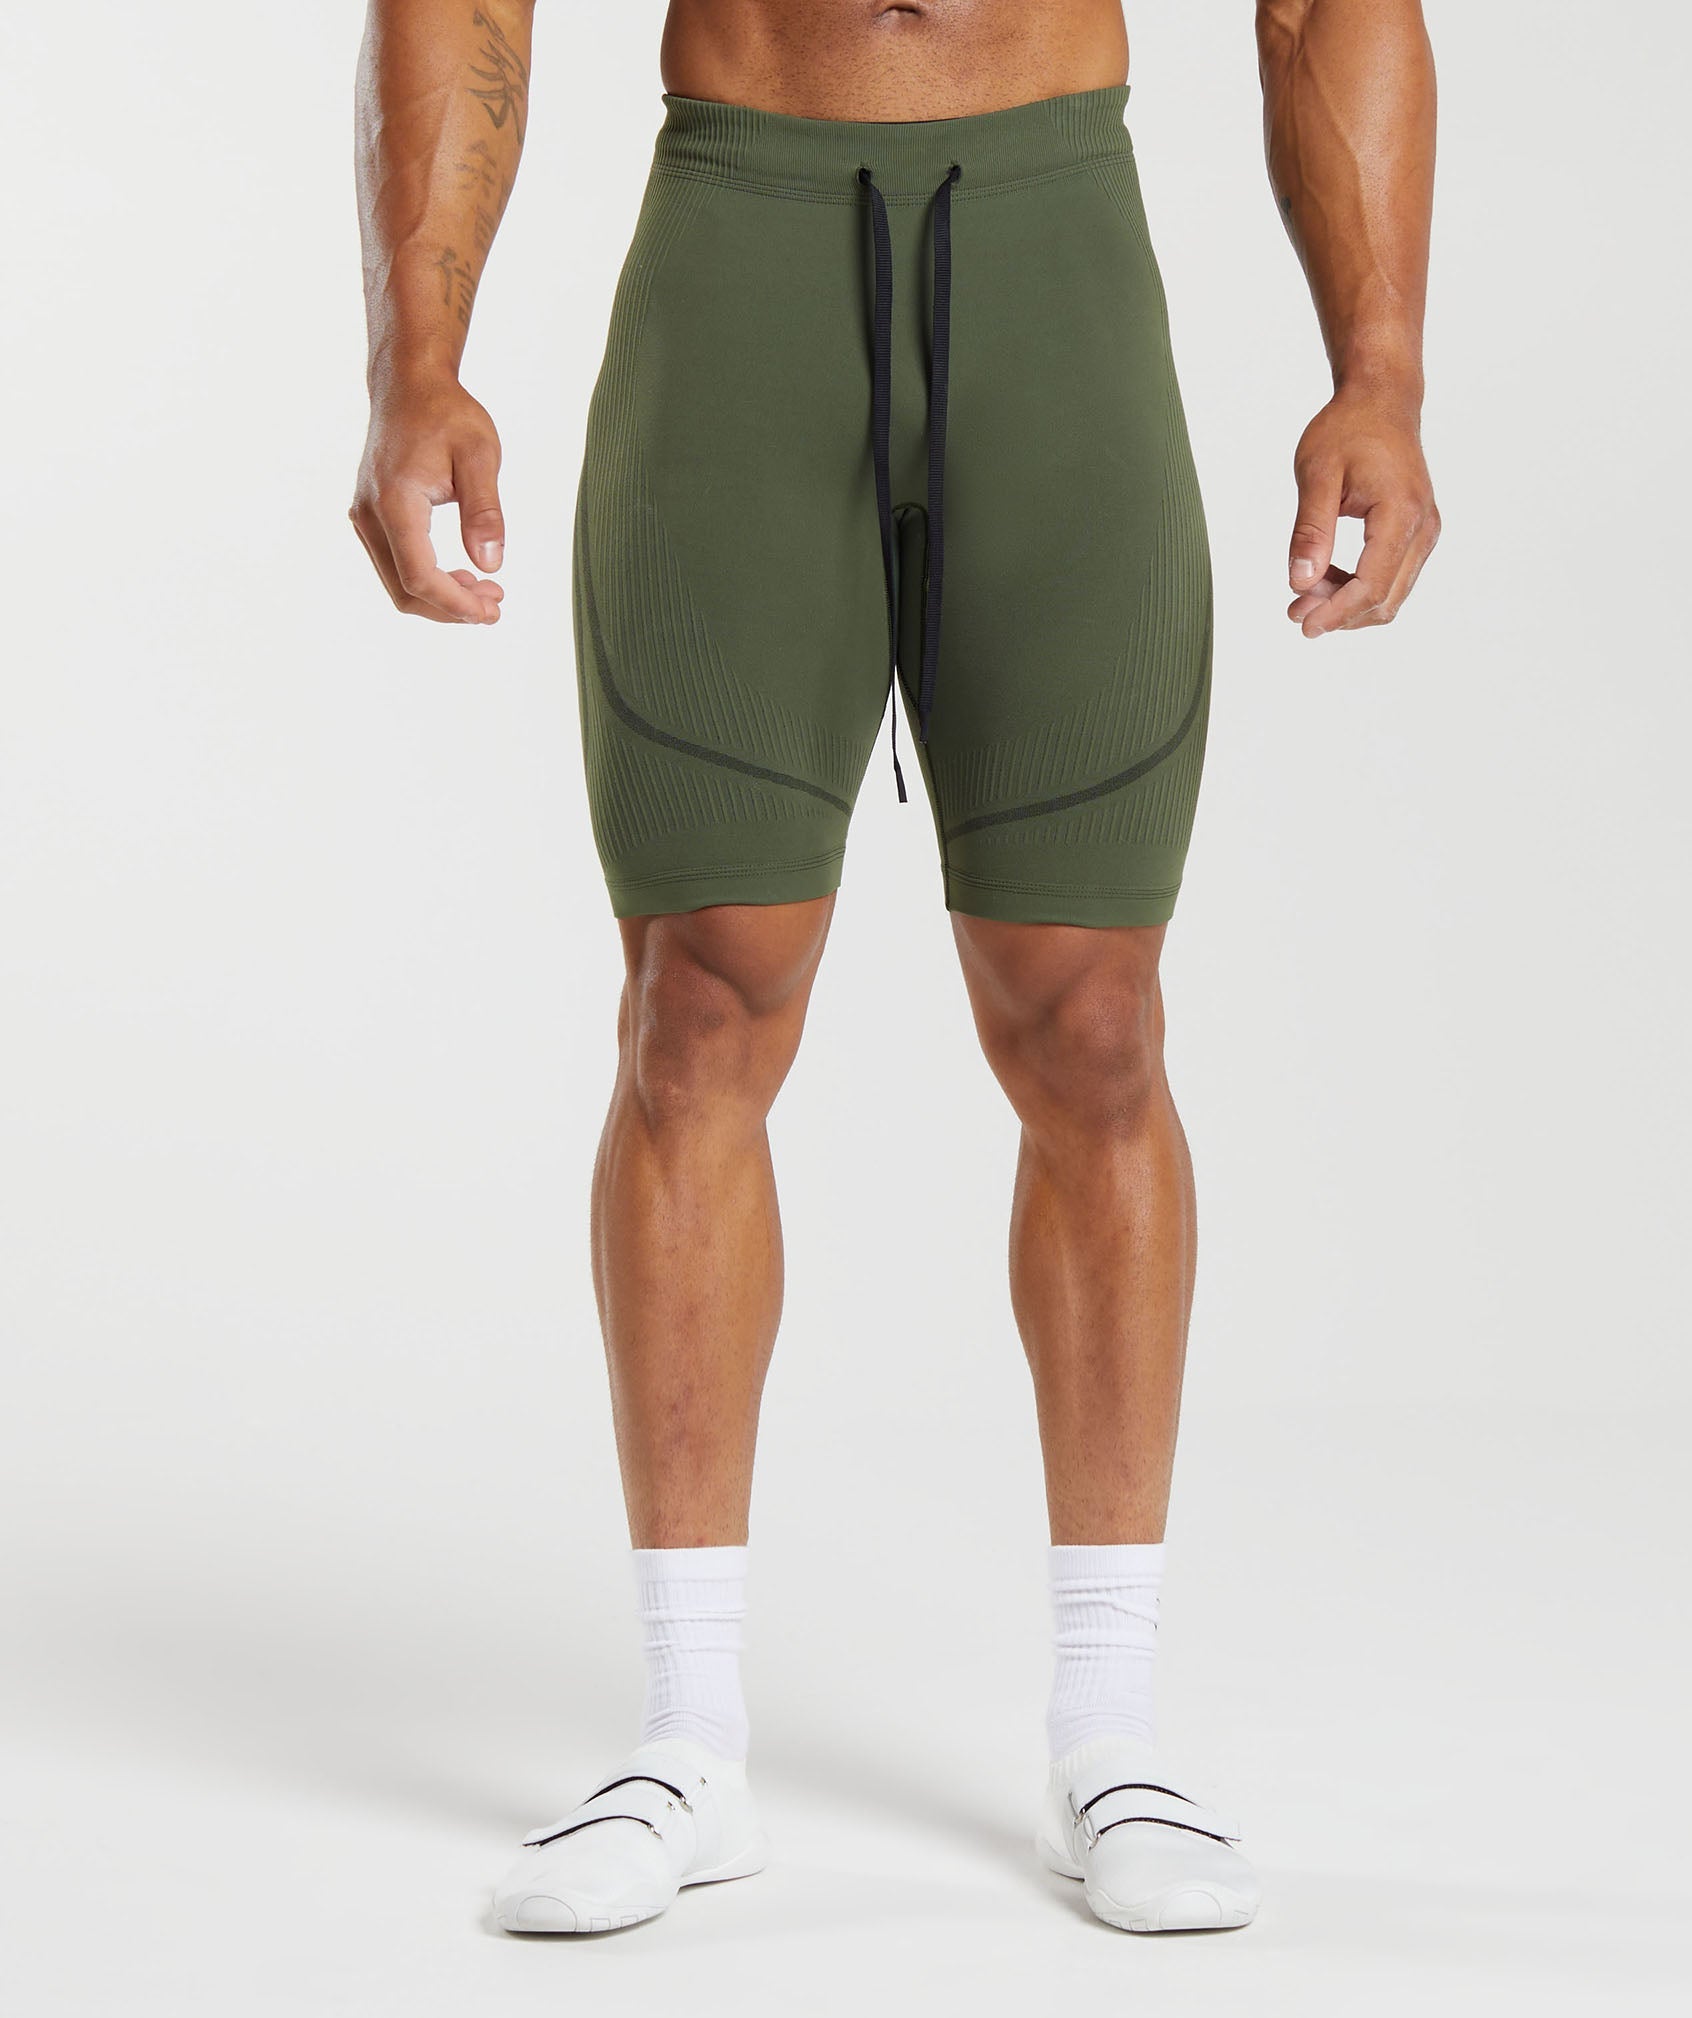 315 Seamless Shorts in Winter Olive/Black - view 1